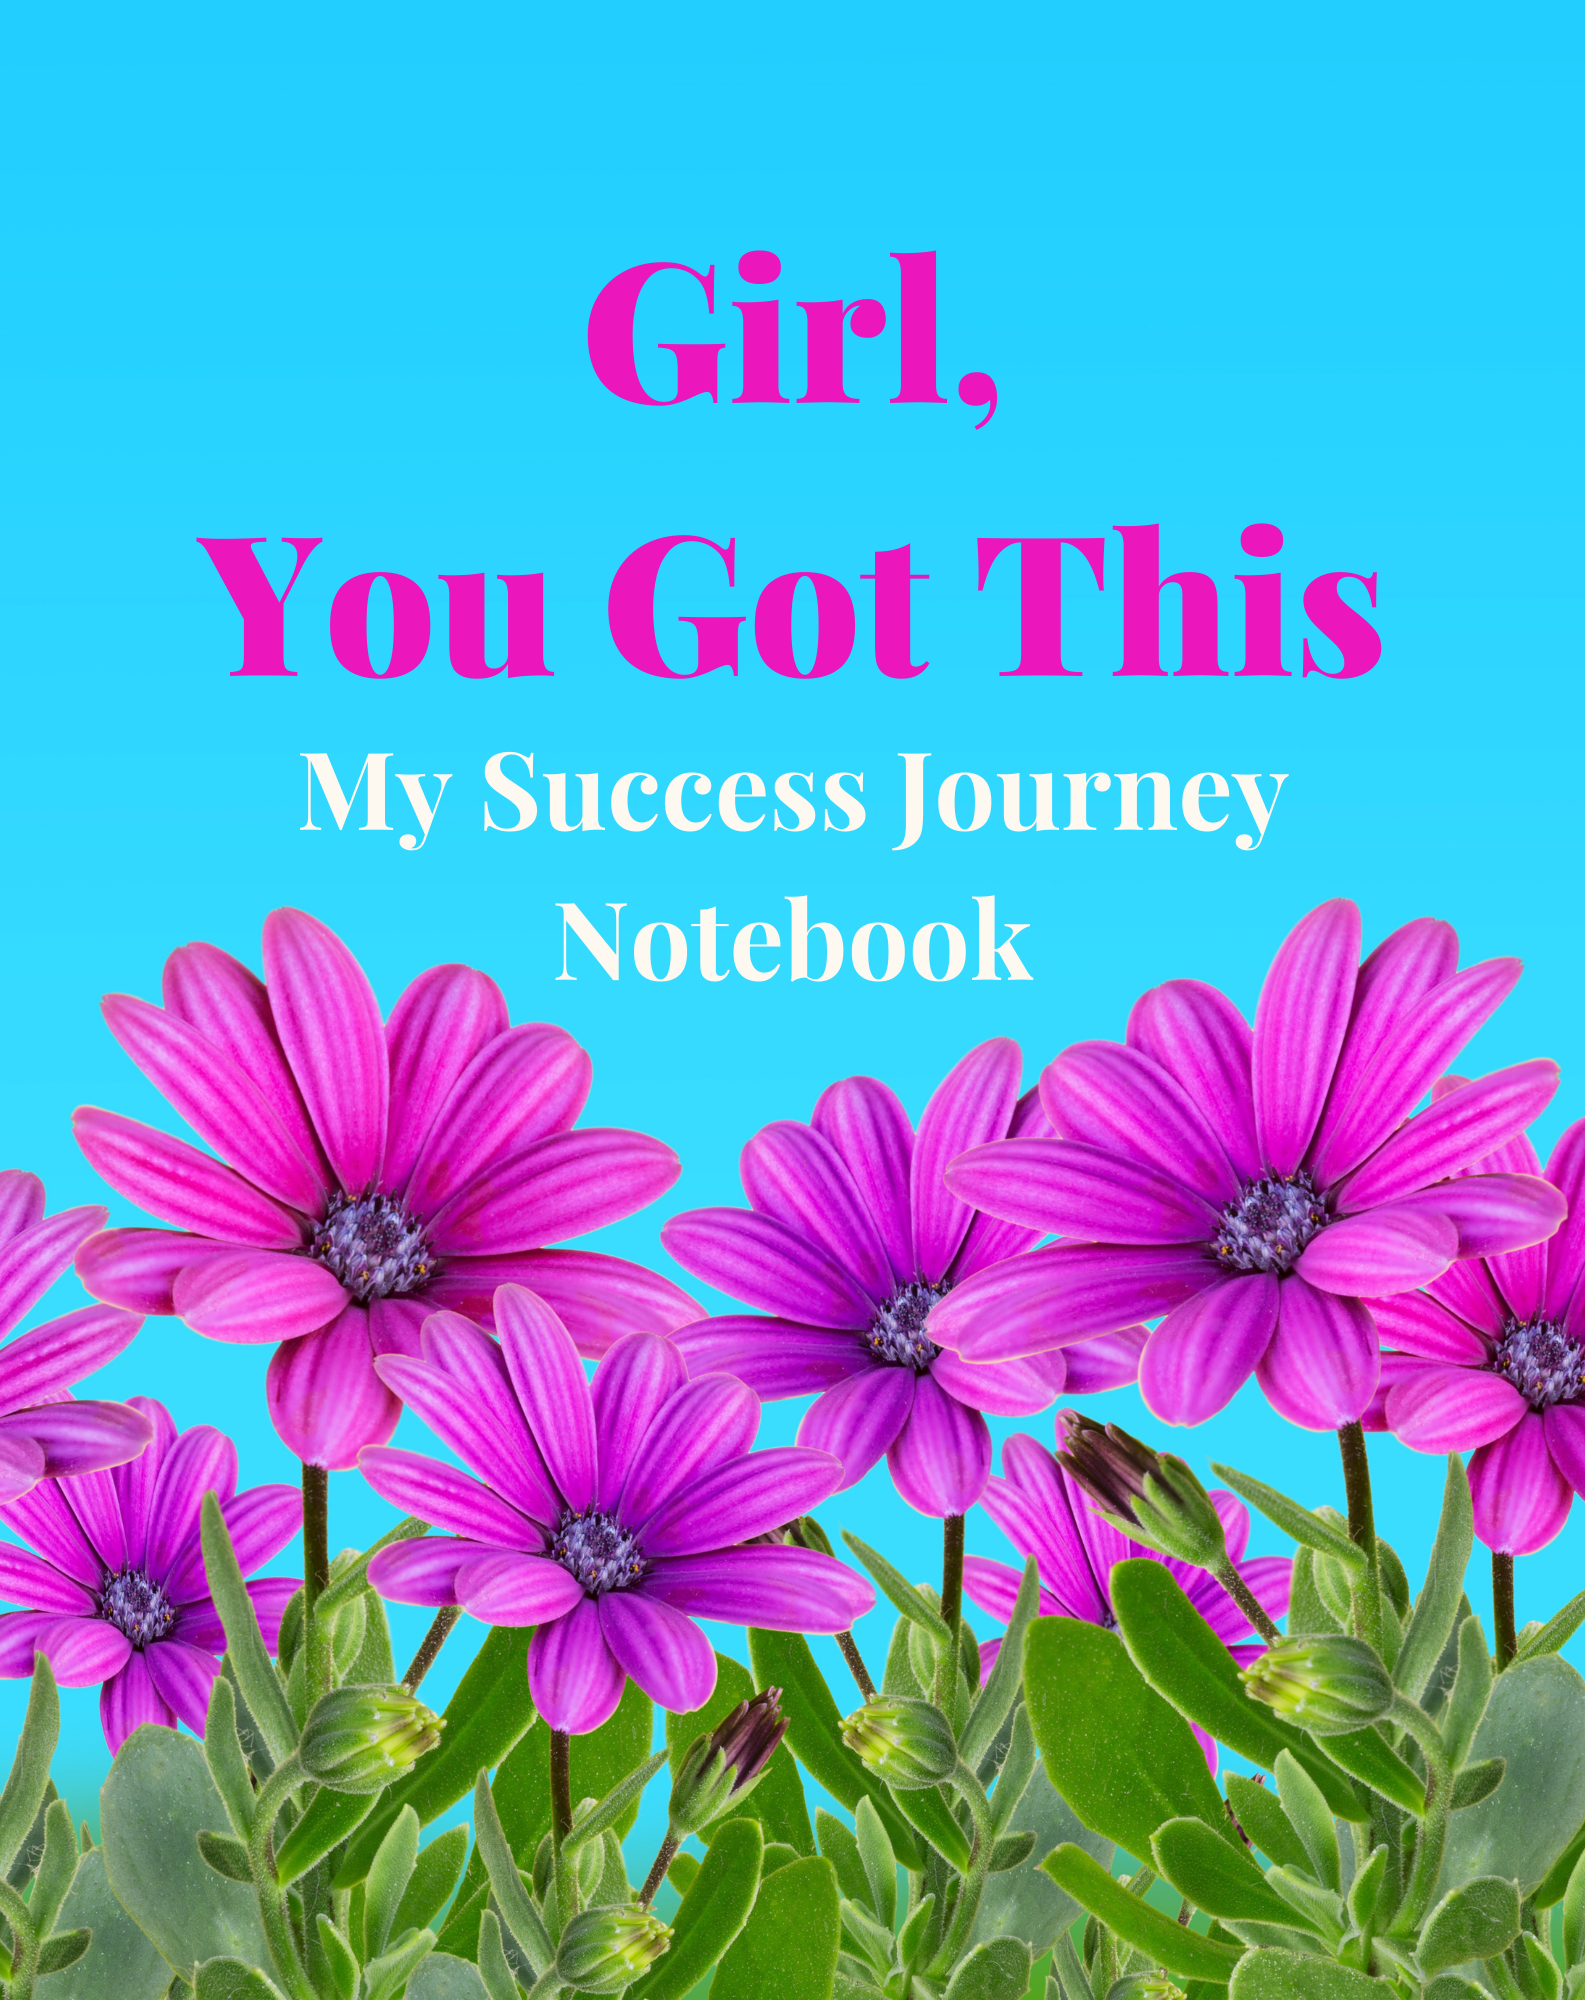 Girl, You Got This!